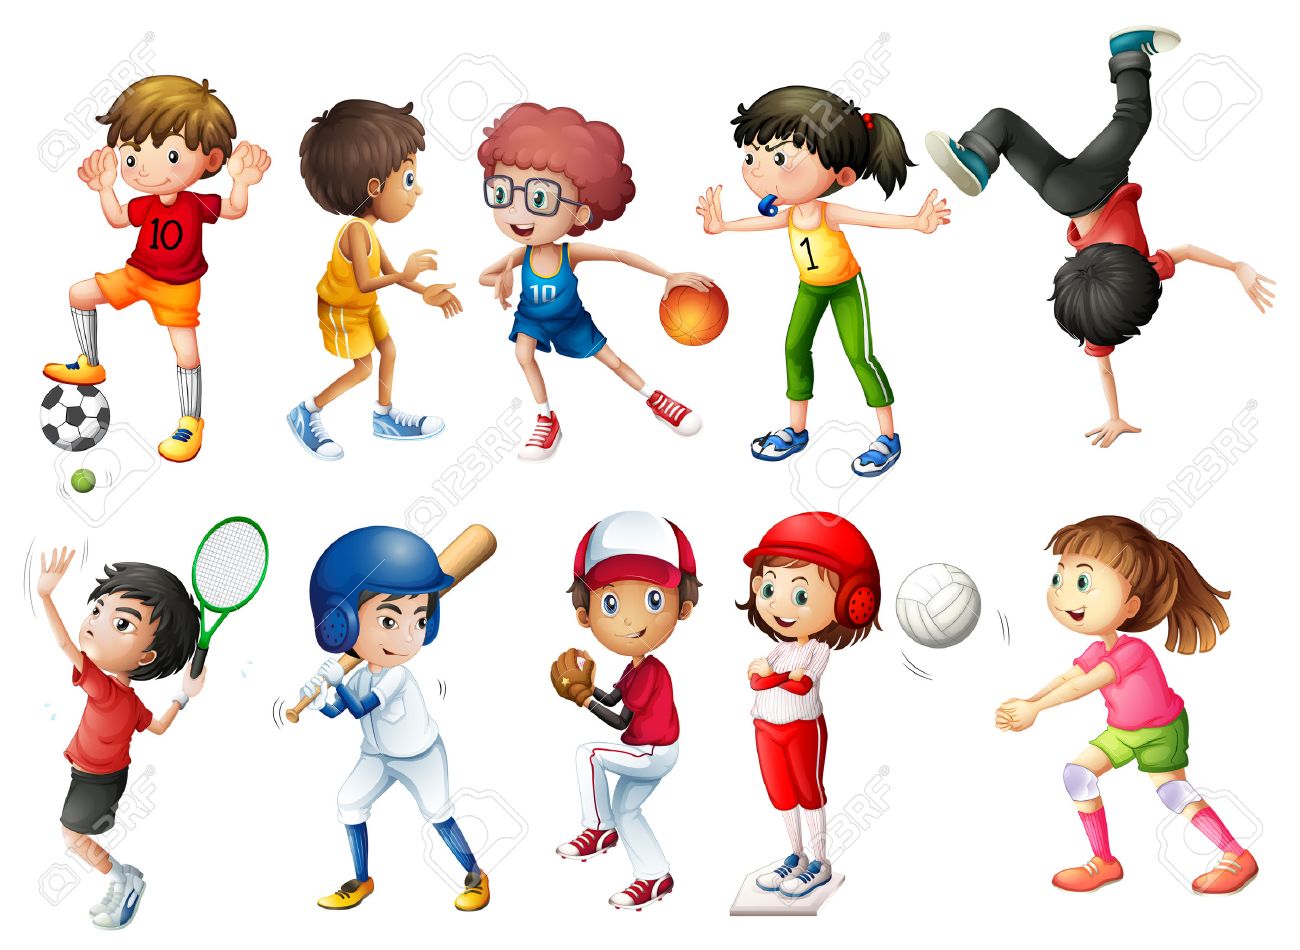 Playing sports clipart